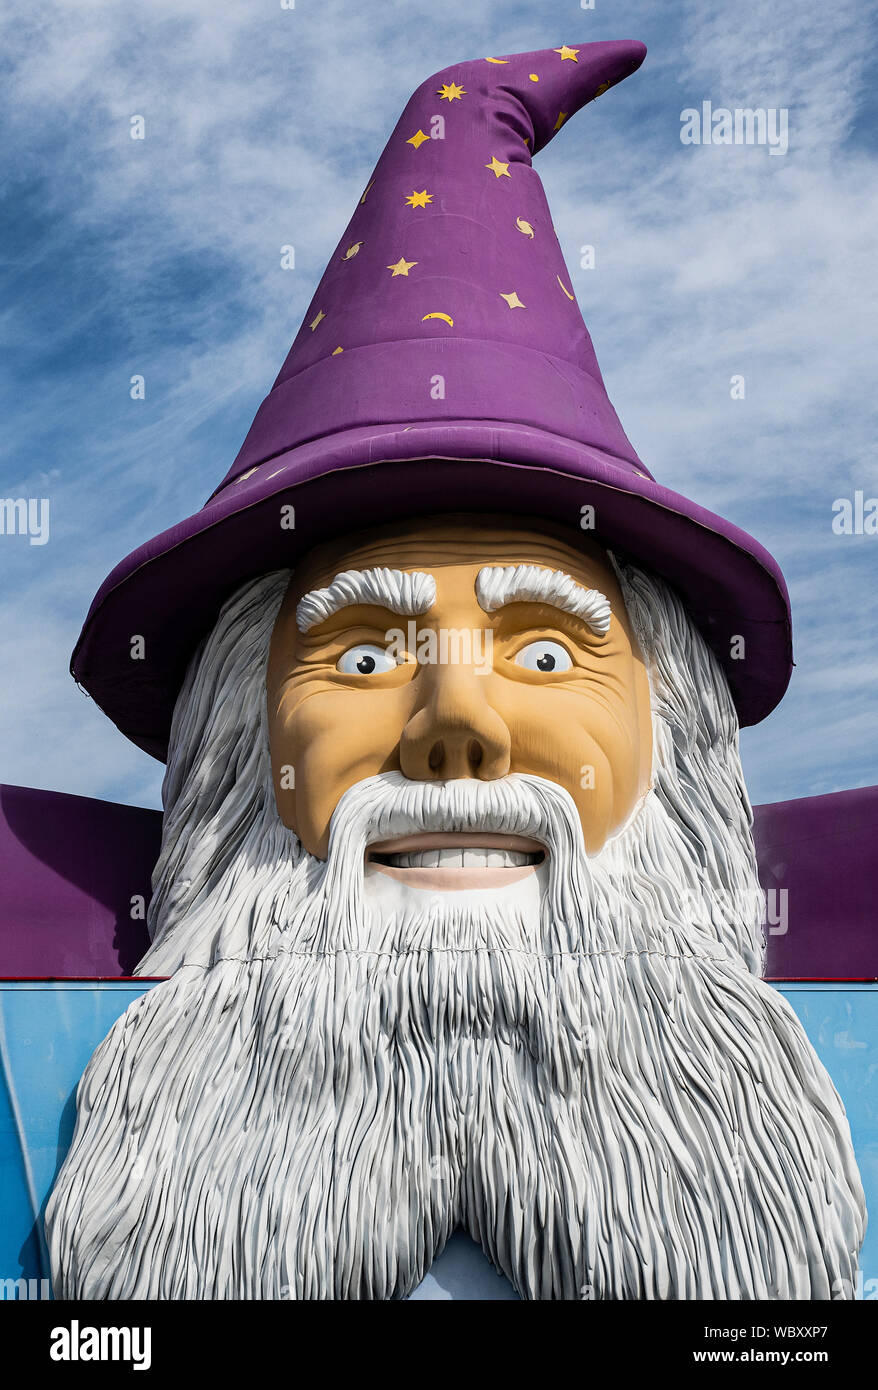 Giant figure of Merlin the Magician. Stock Photo